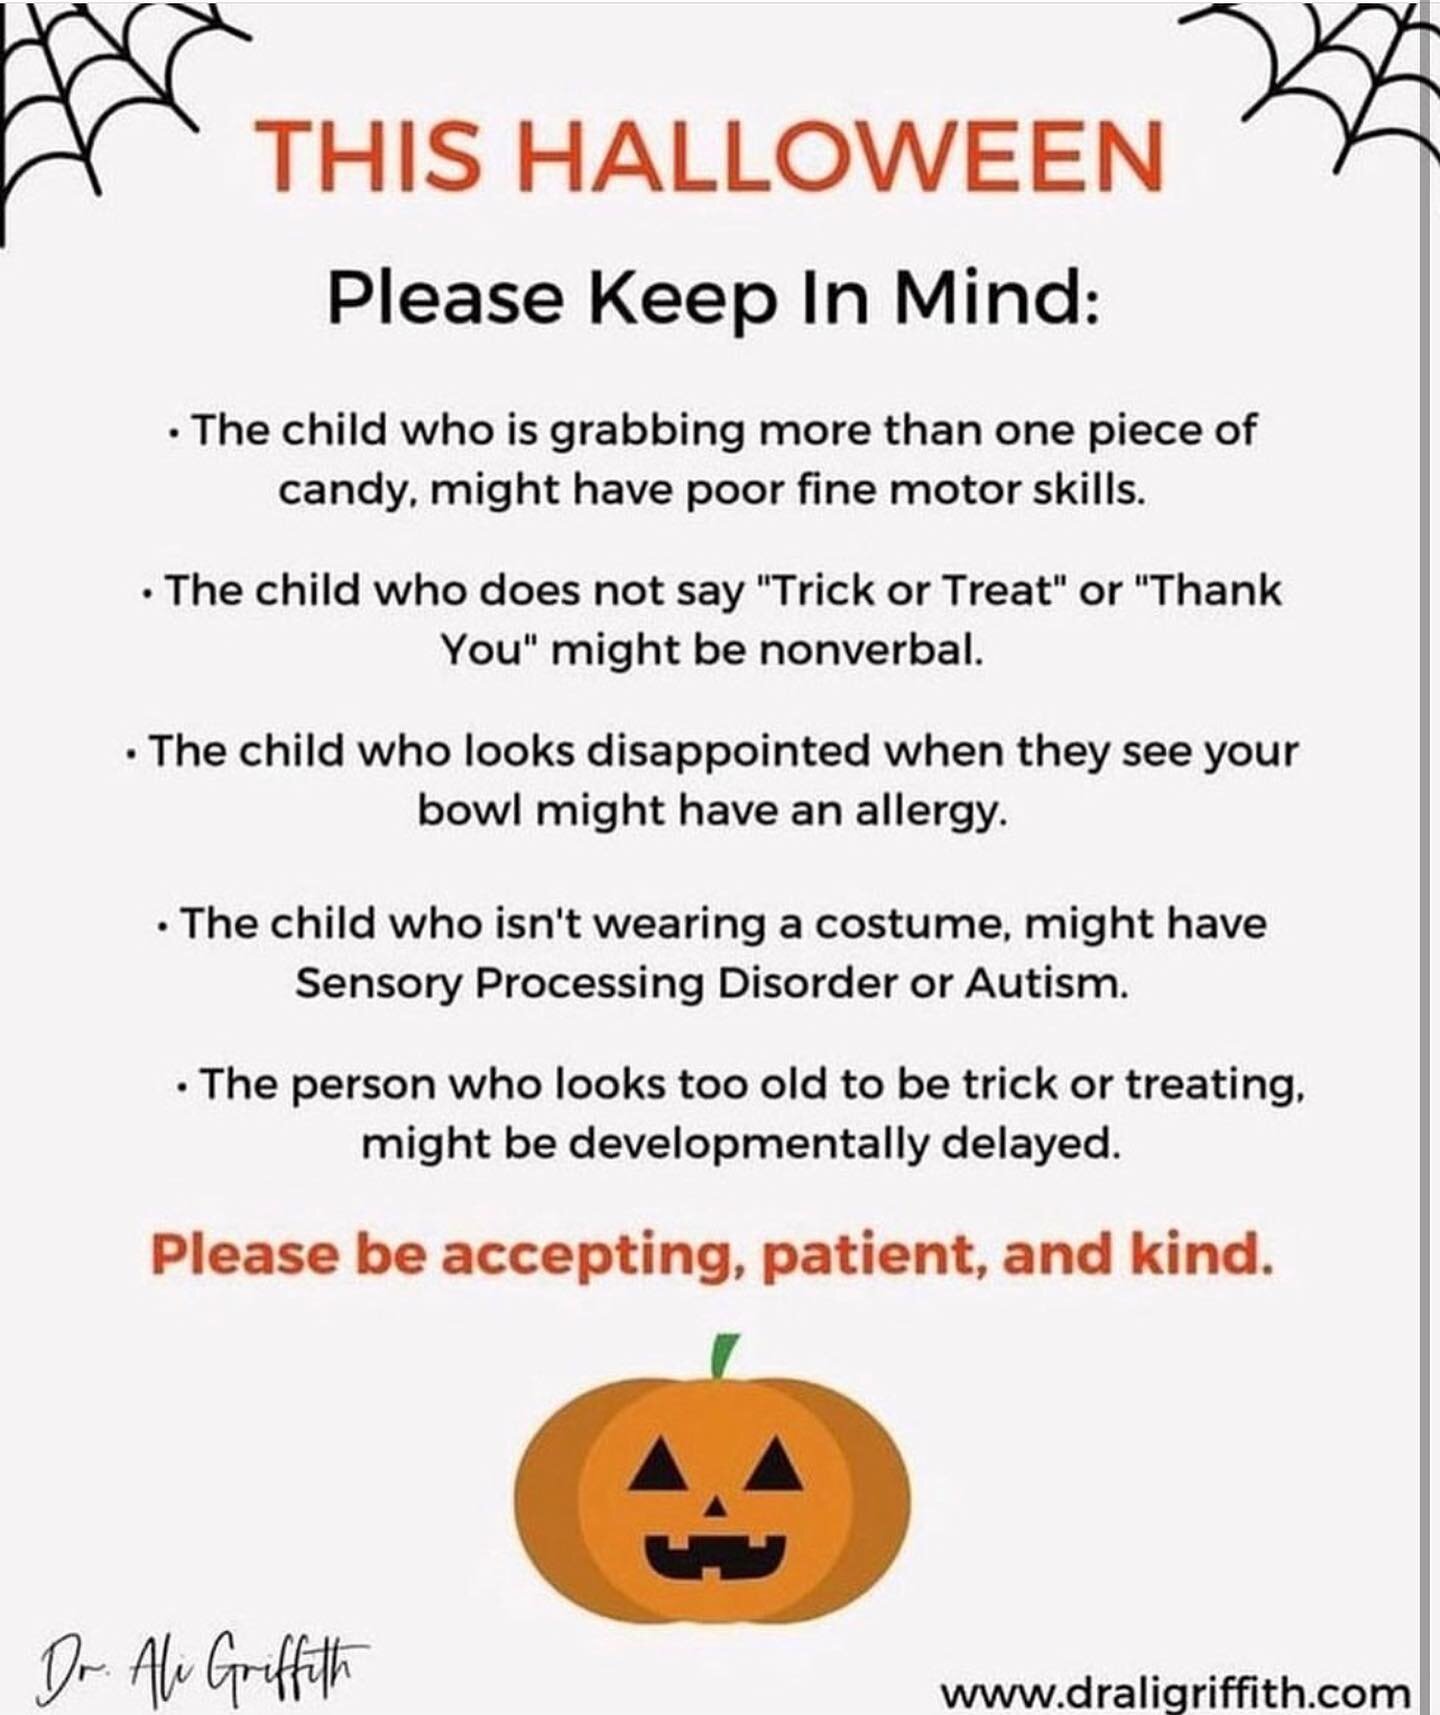 Here&rsquo;s a great reminder. Happy Halloween to all celebrating tonight! 🎃✨

Repost @draligriffith